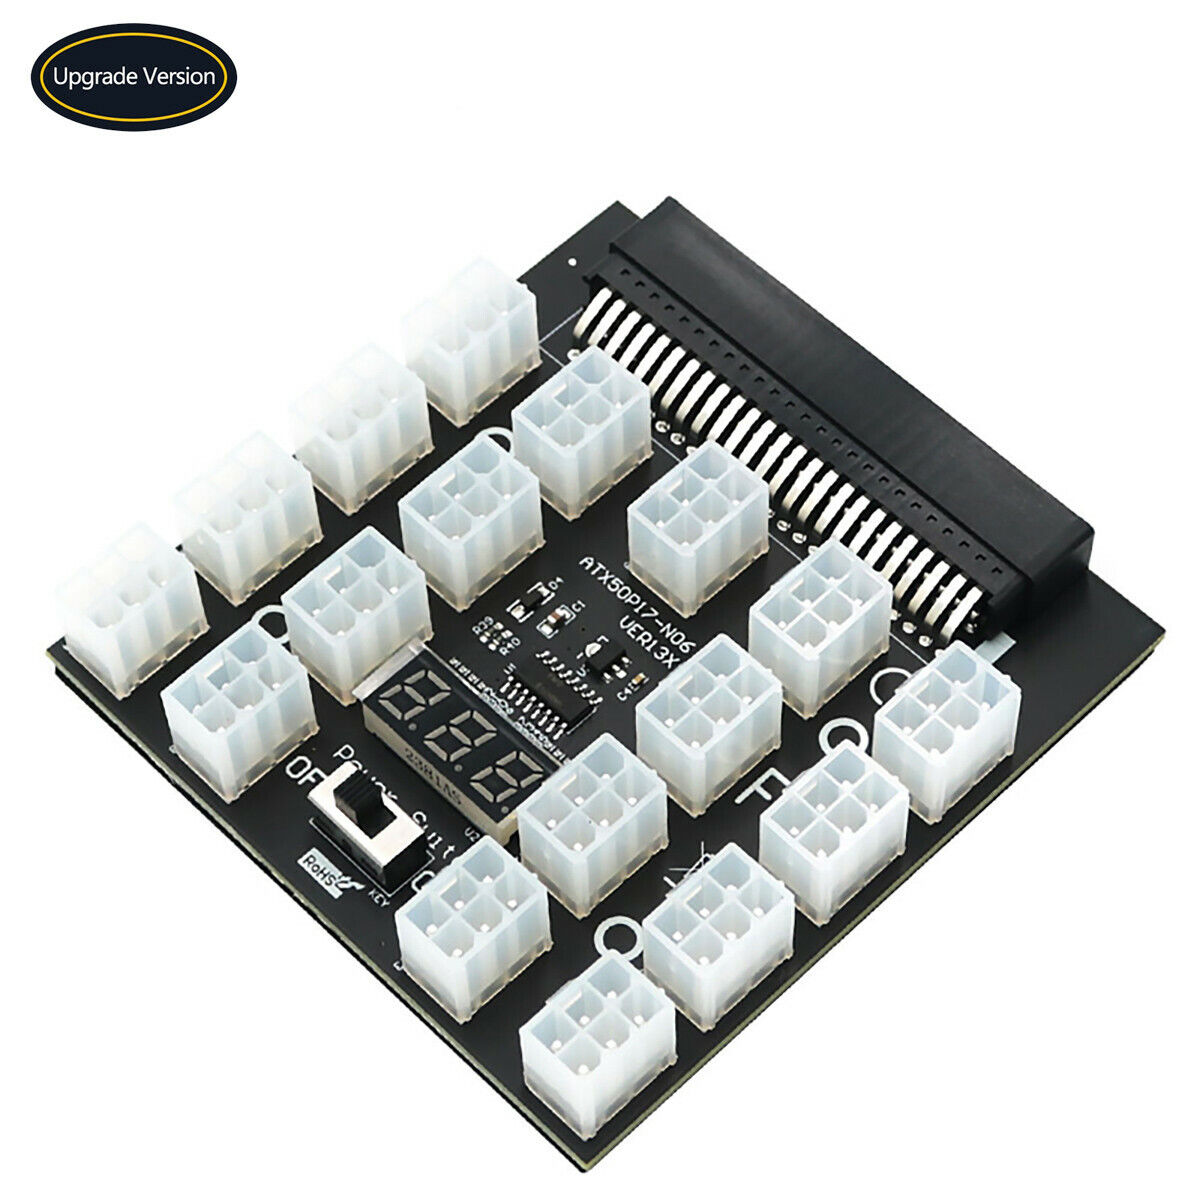 PCI-e 12V 50pin to ATX 17 x 6Pin Power Supply Breakout Board Adapter for BTC